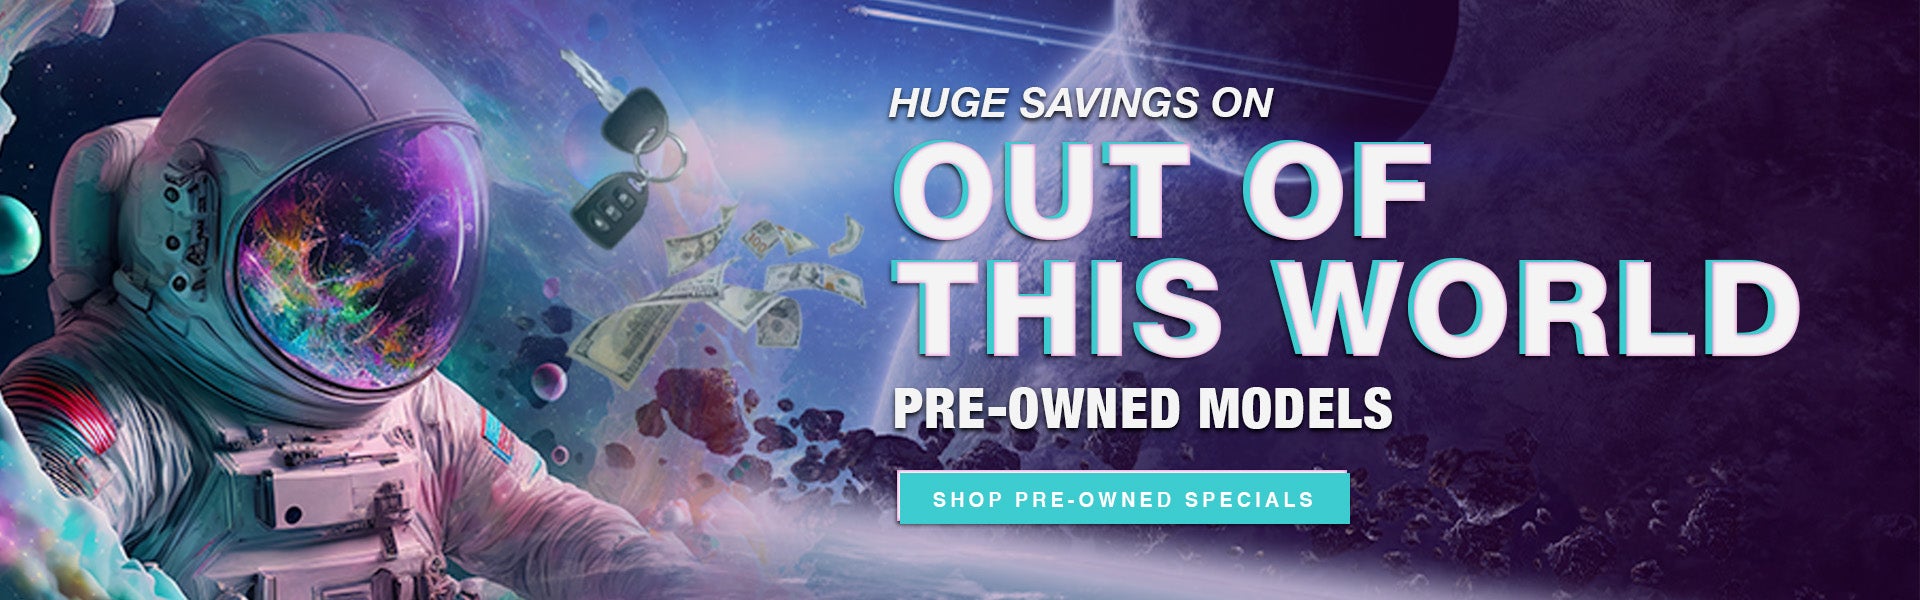 Out Of This World Deals on Pre-Owned Models!